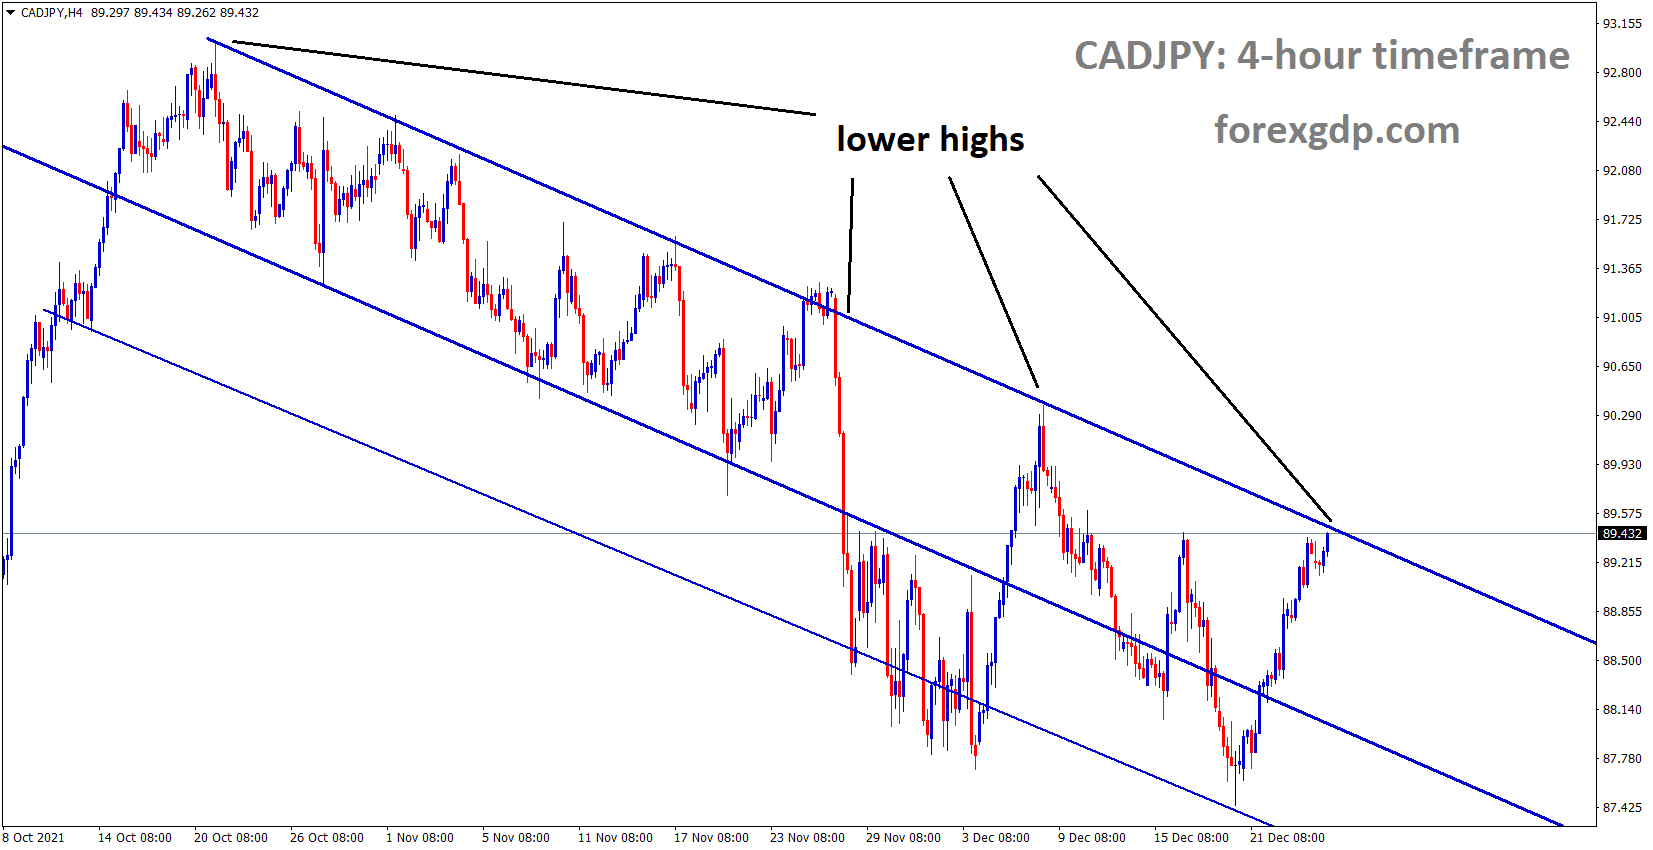 CADJPY is moving in the Descending channel and the market has reached the lower high area of the channel.